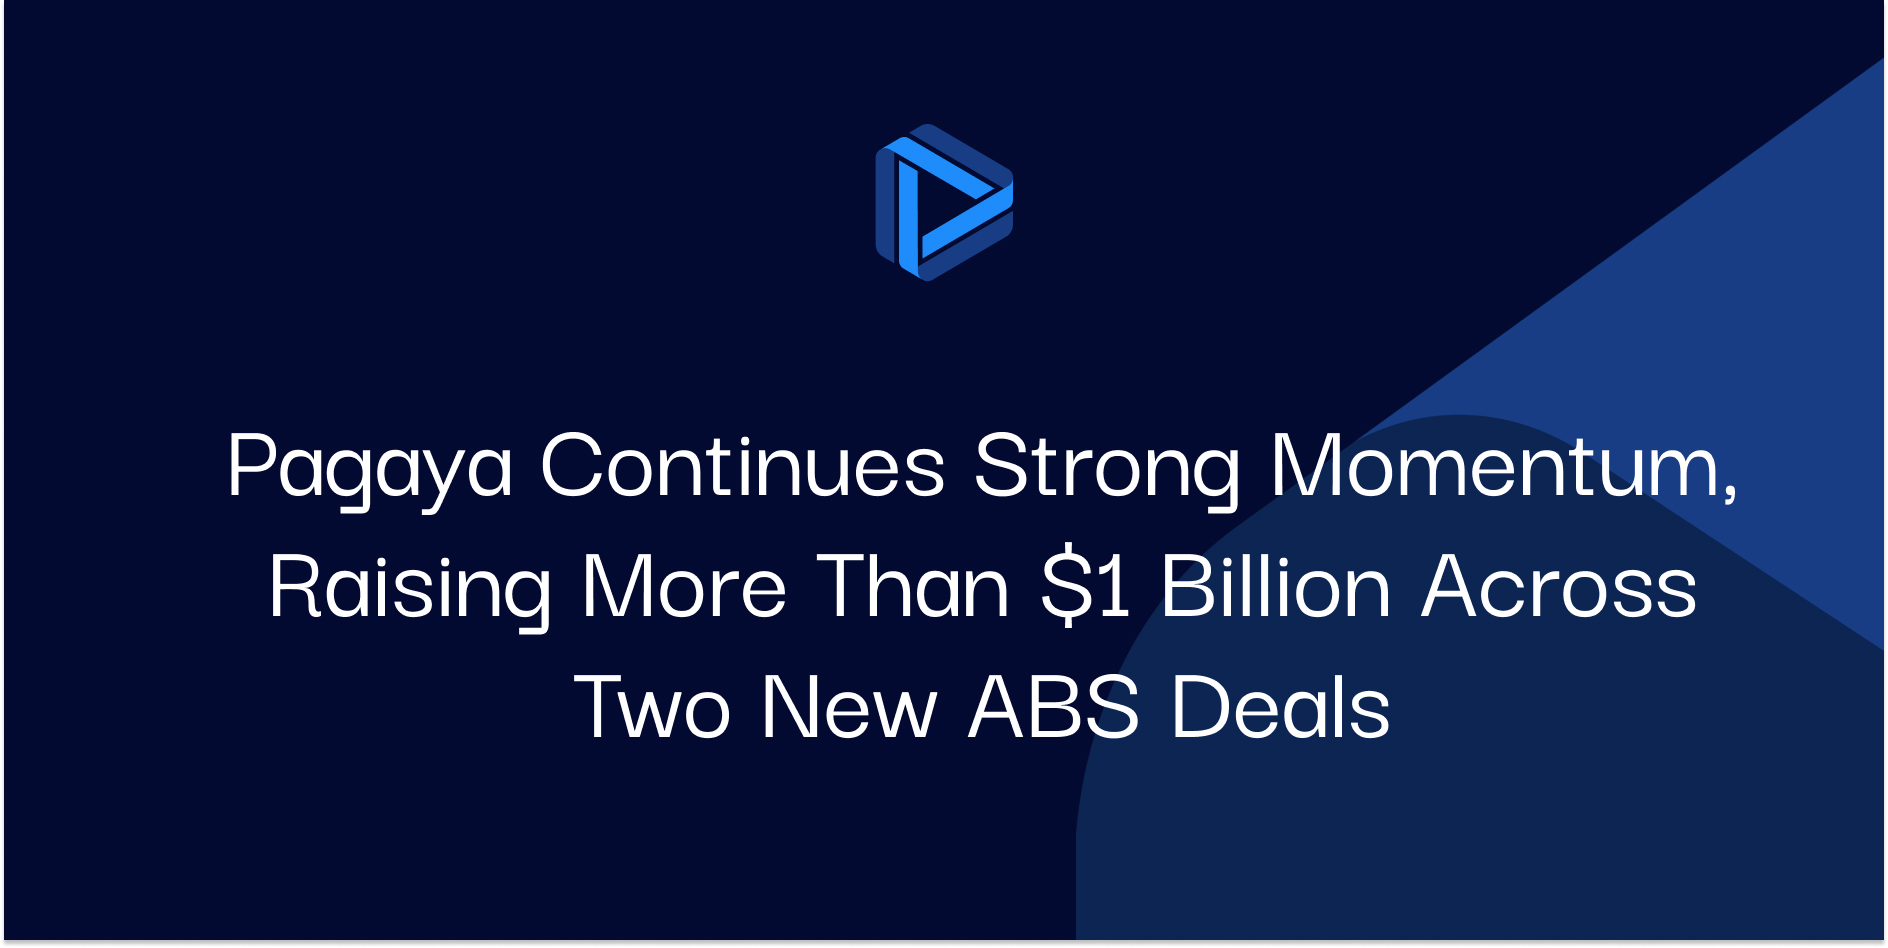 Pagaya Continues Strong Momentum, Raising More Than $1 Billion Across Two New ABS Deals